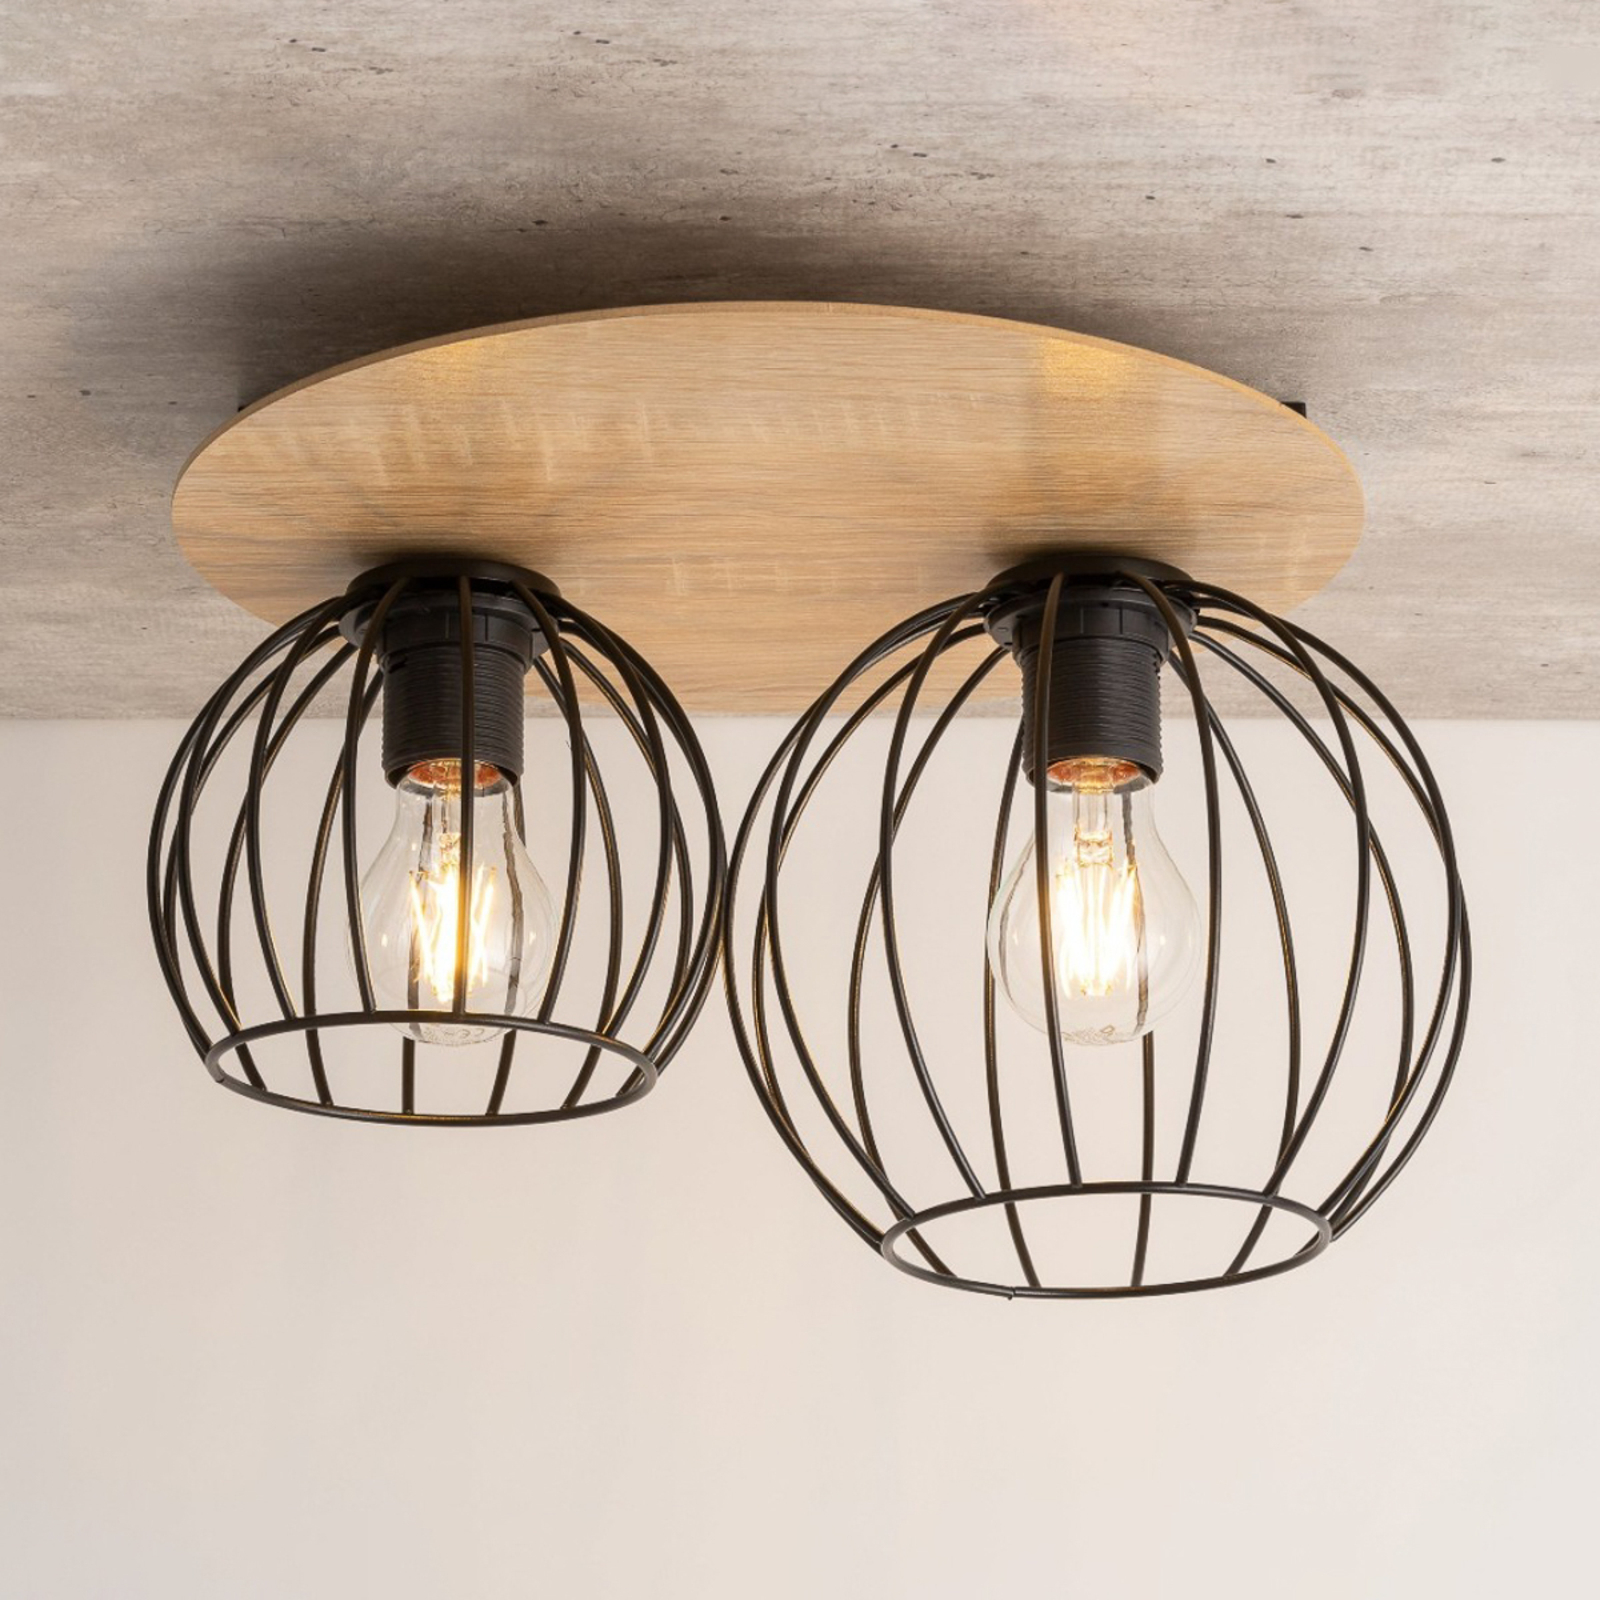 Malin ceiling light, wooden panel round, 2-bulb